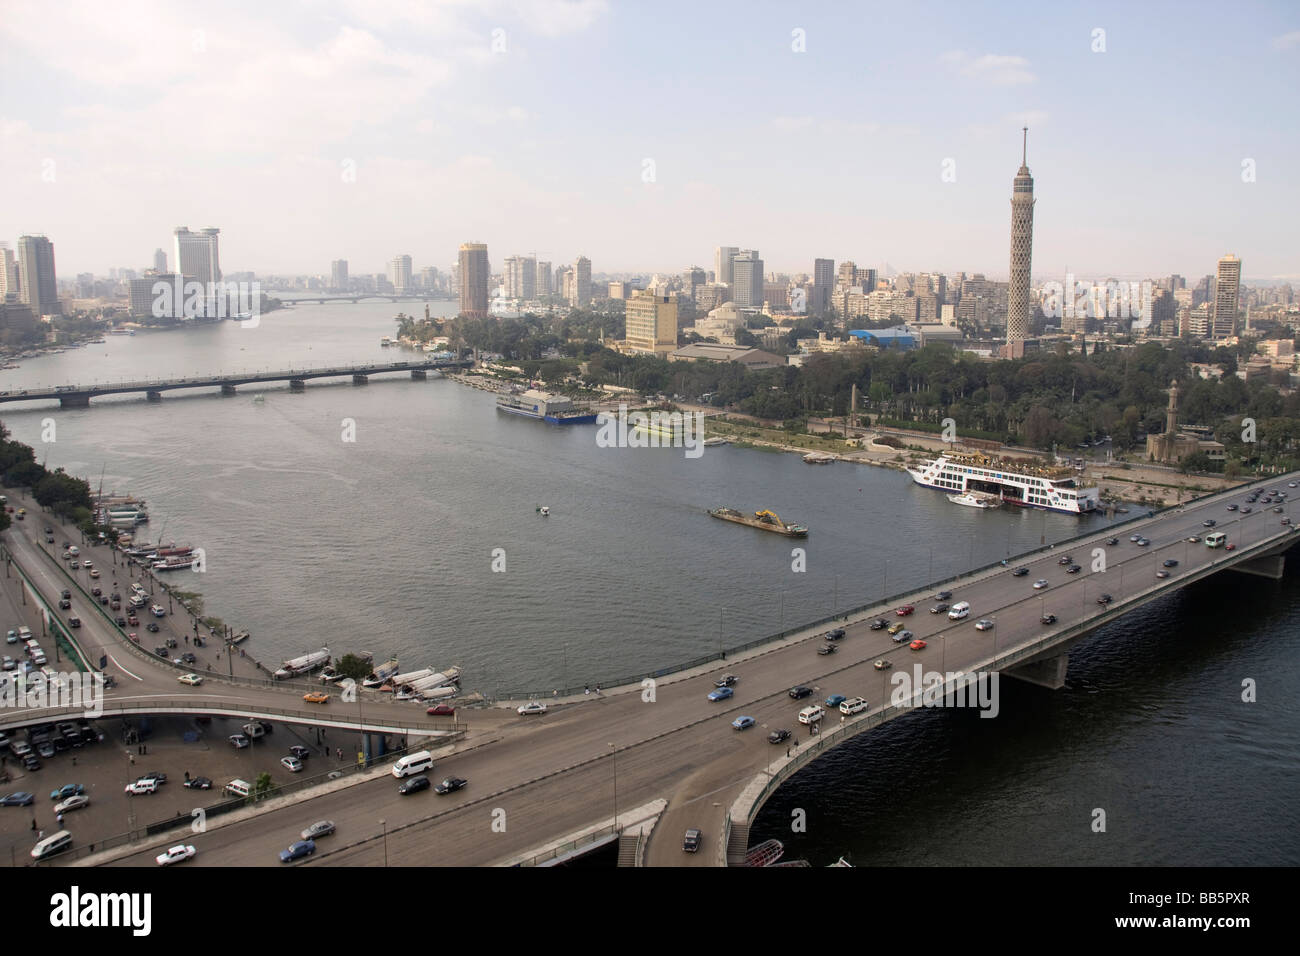 cairo by day looking over river nile Stock Photo